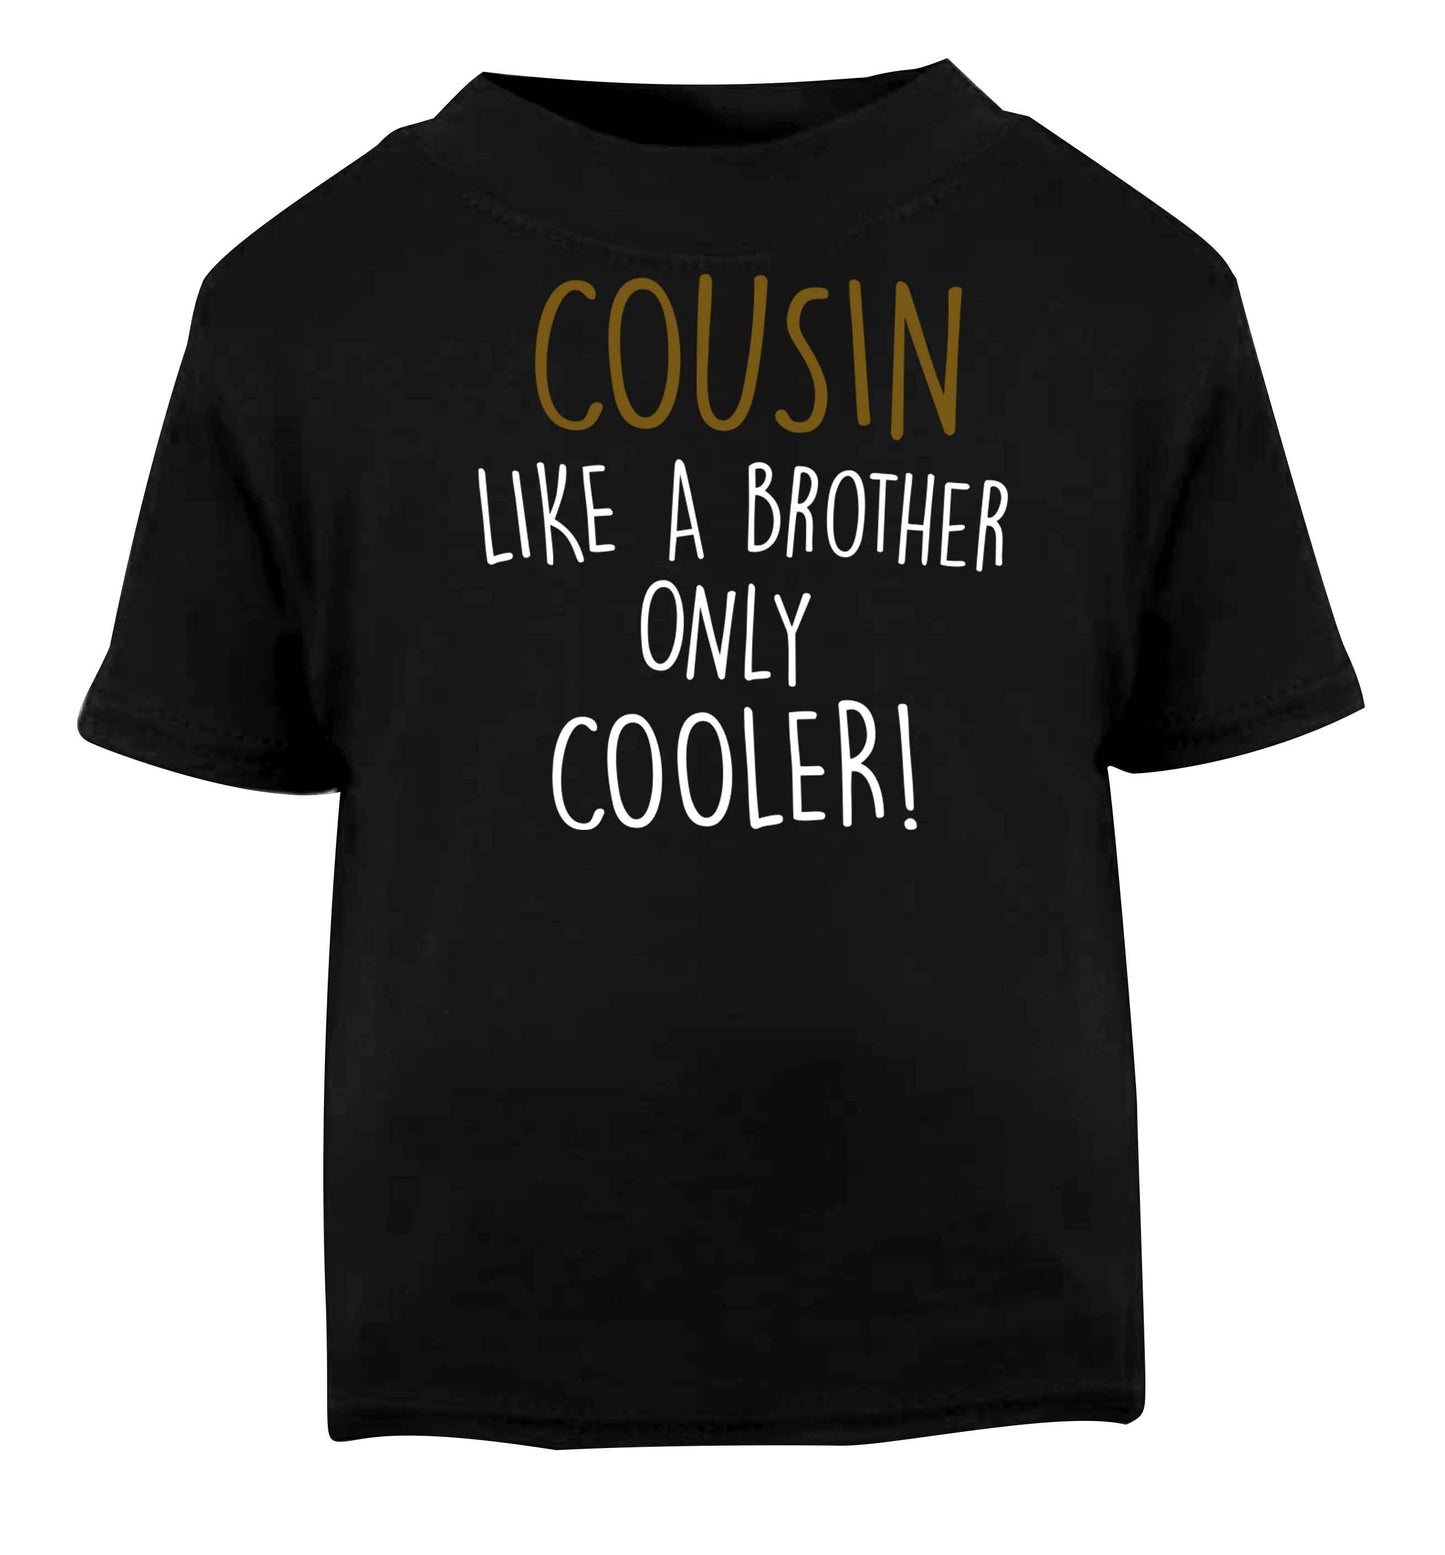 Cousin like a brother only cooler Black baby toddler Tshirt 2 years